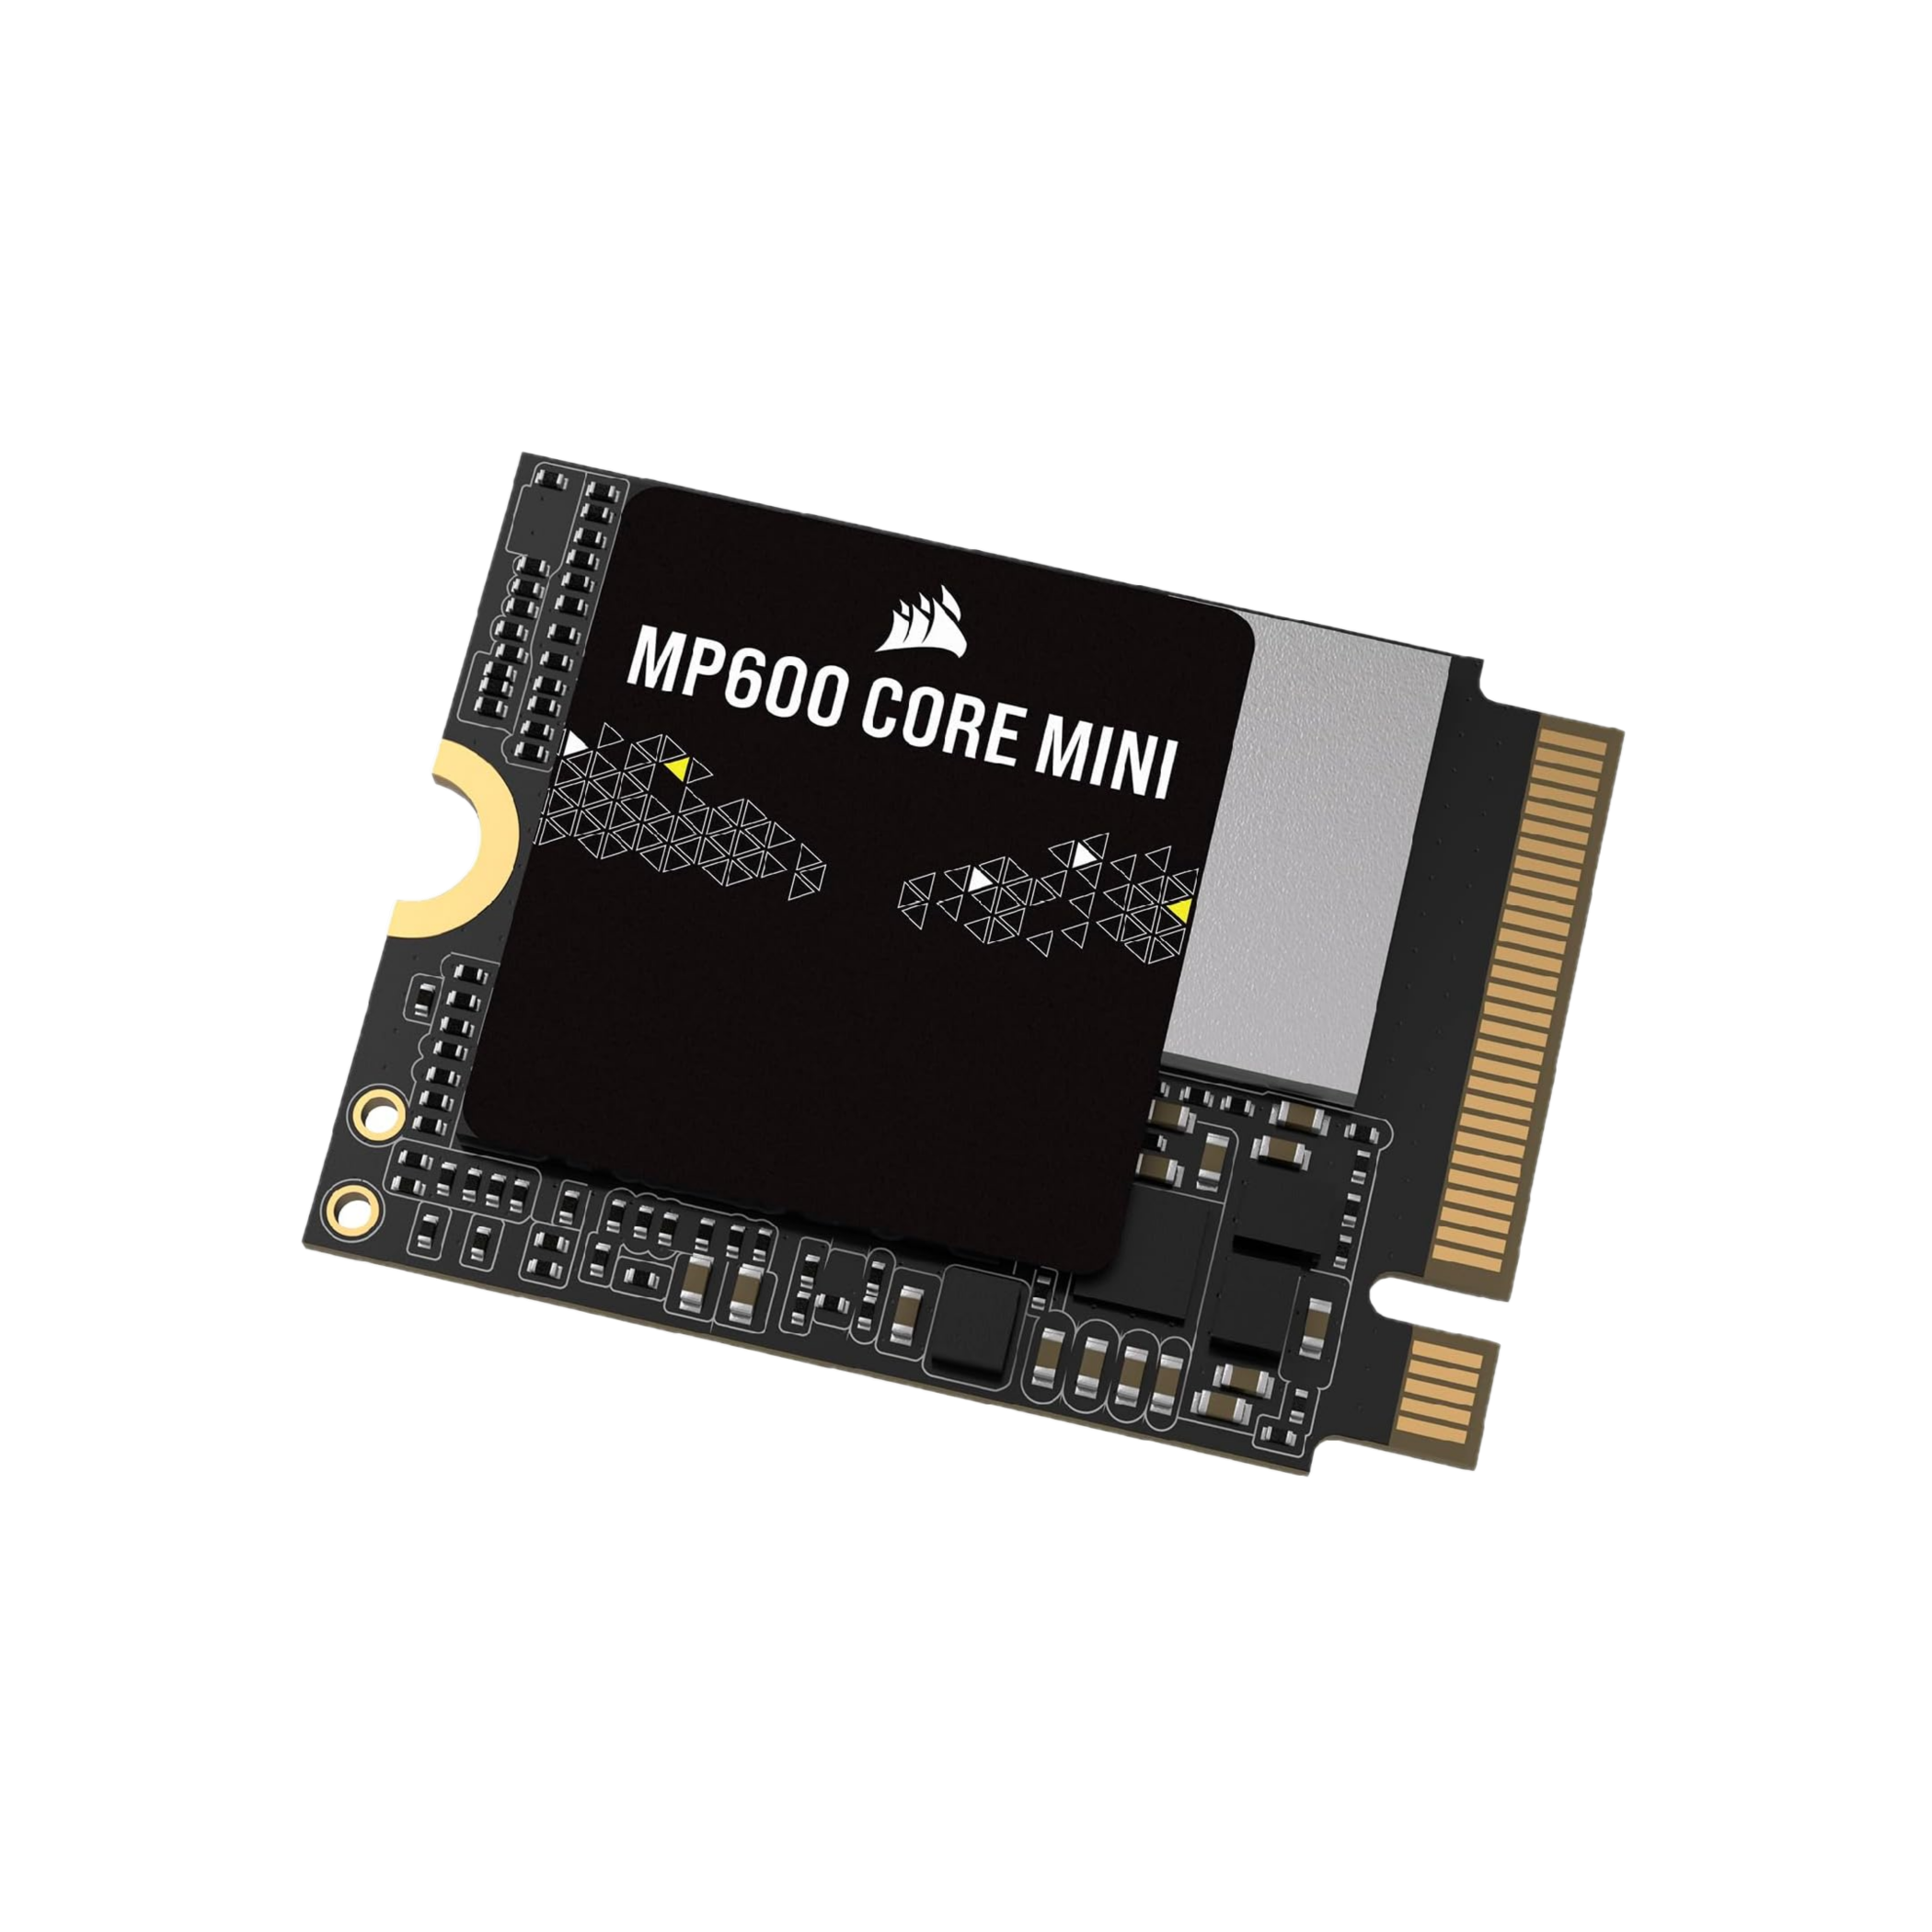 Upgrade your Steam Deck with this 2TB Gen4 M.2 SSD which is down